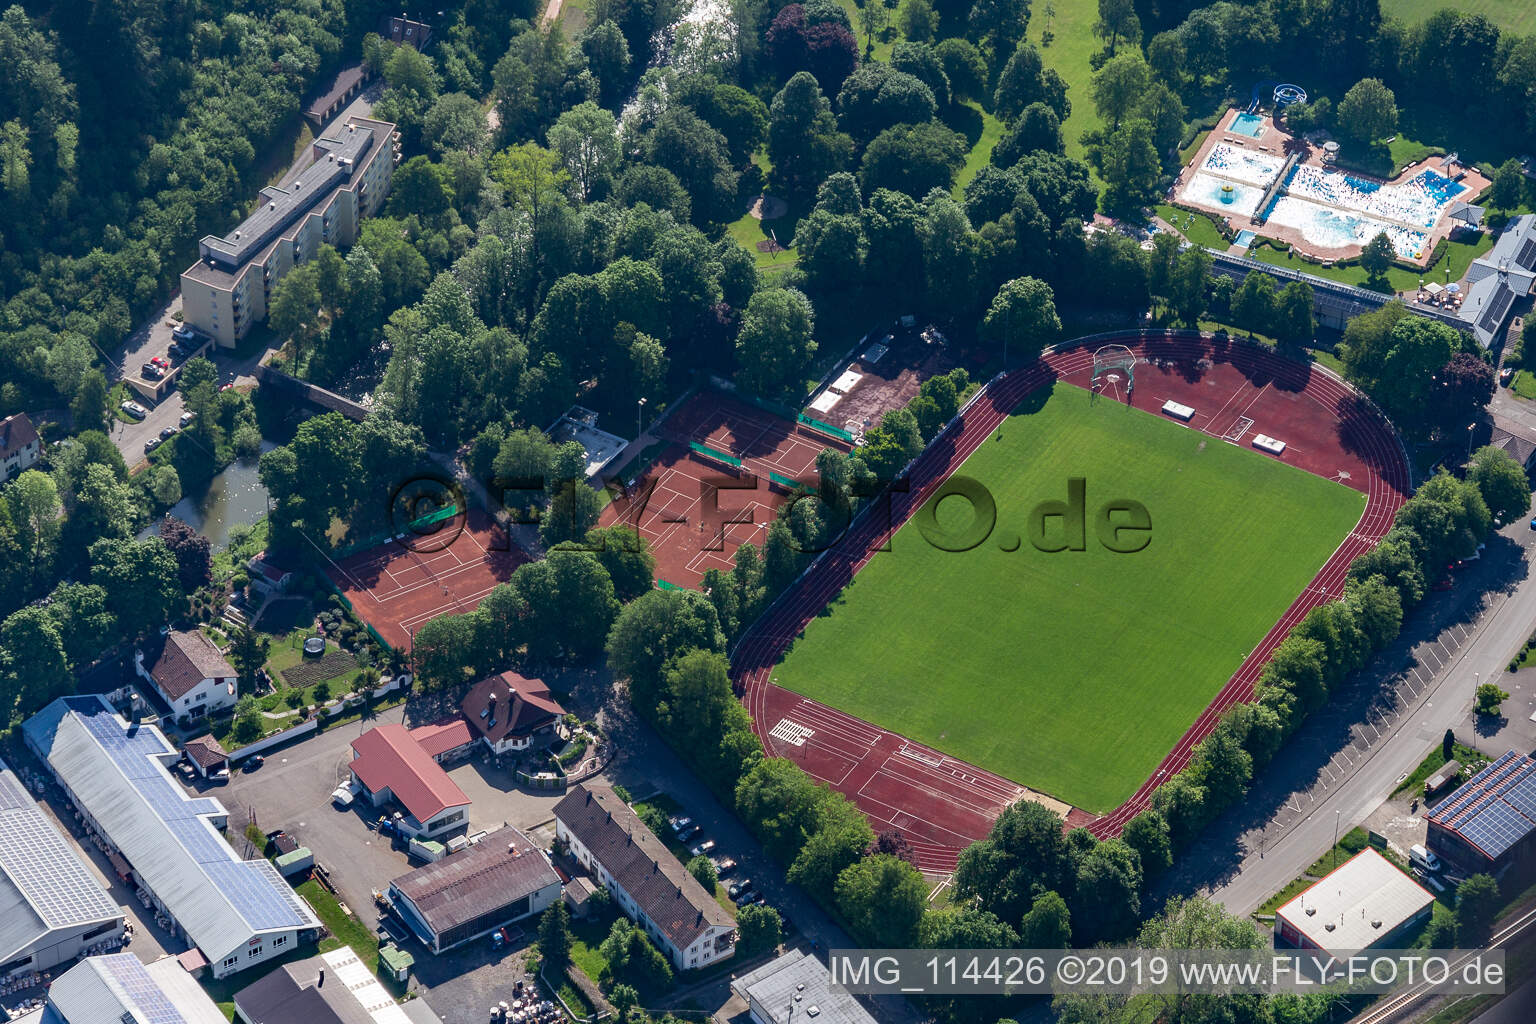 Stadion in Oberndorf am Neckar in the state Baden-Wuerttemberg, Germany